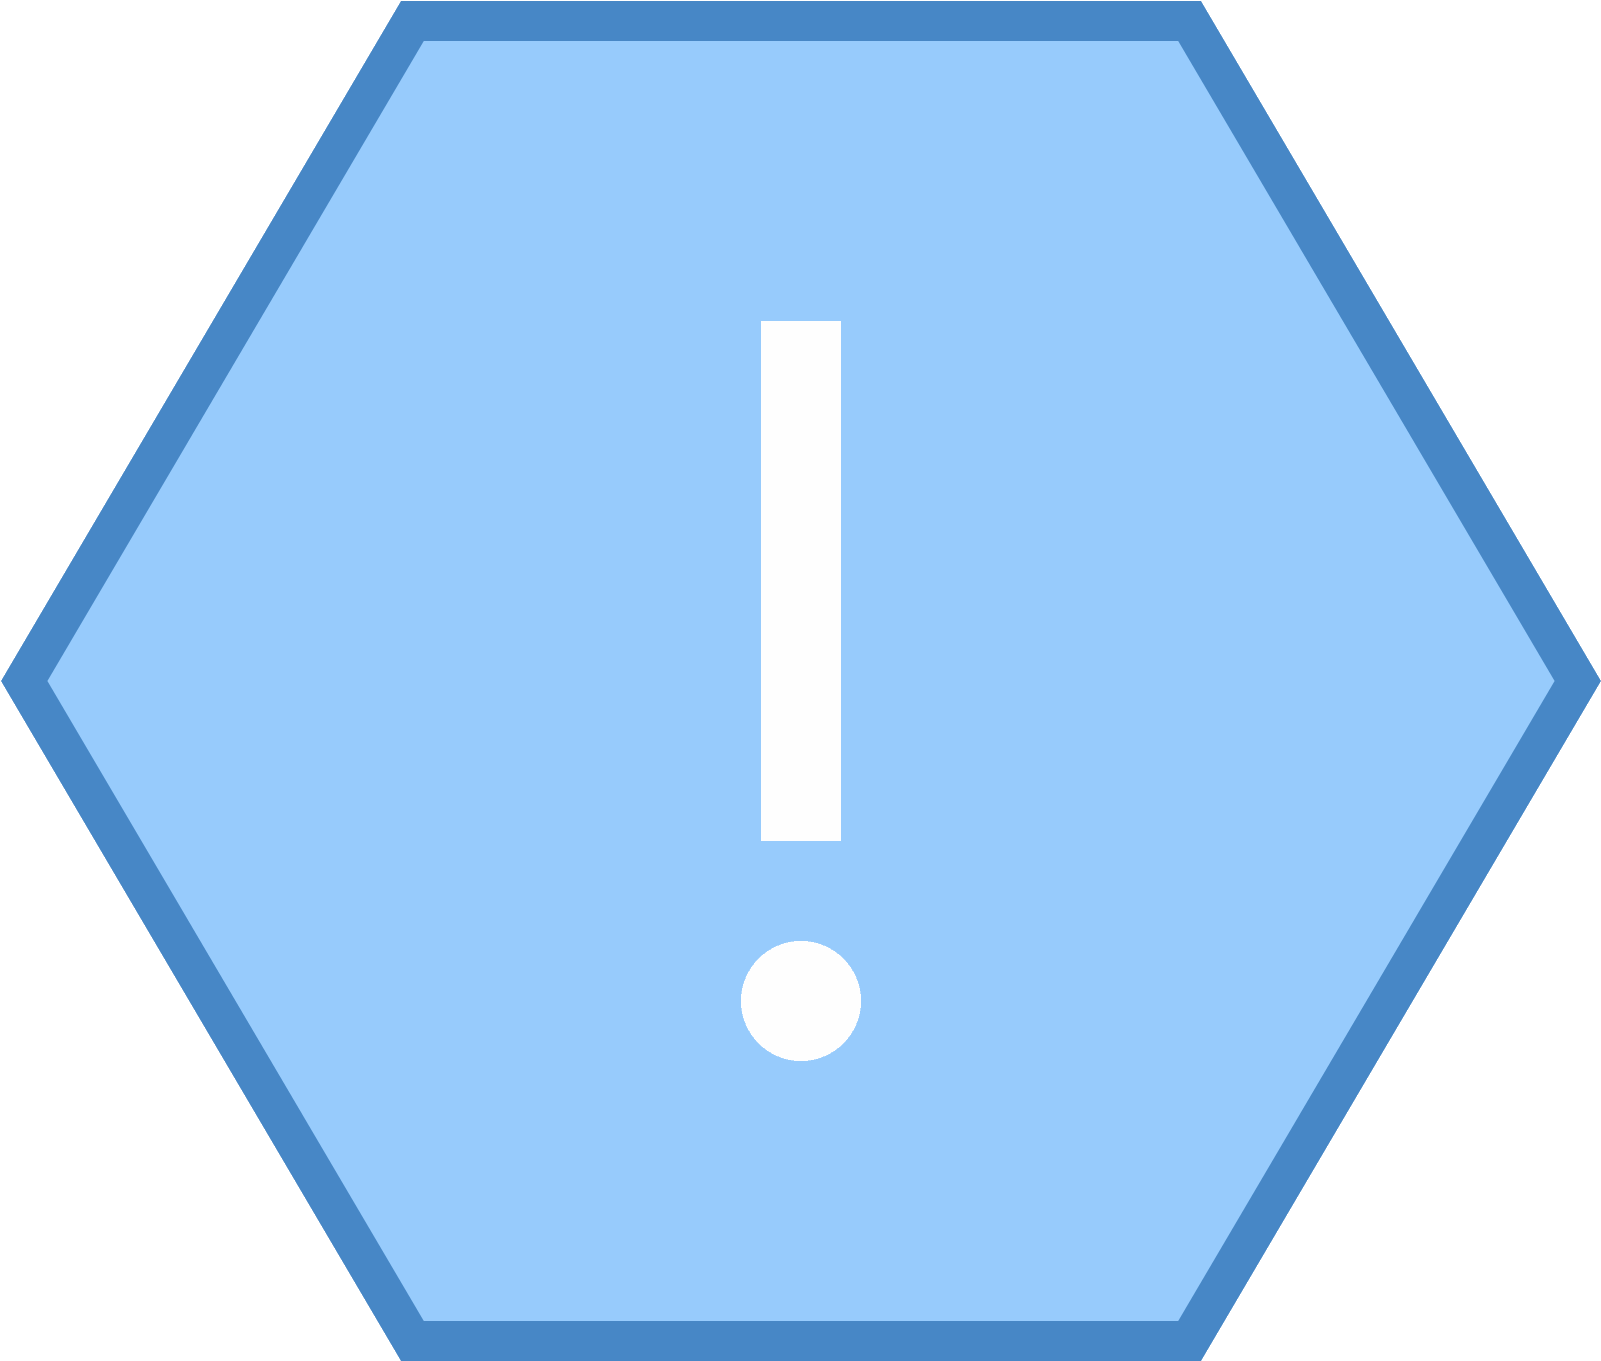 Blue Octagon Exclamation Mark Sign